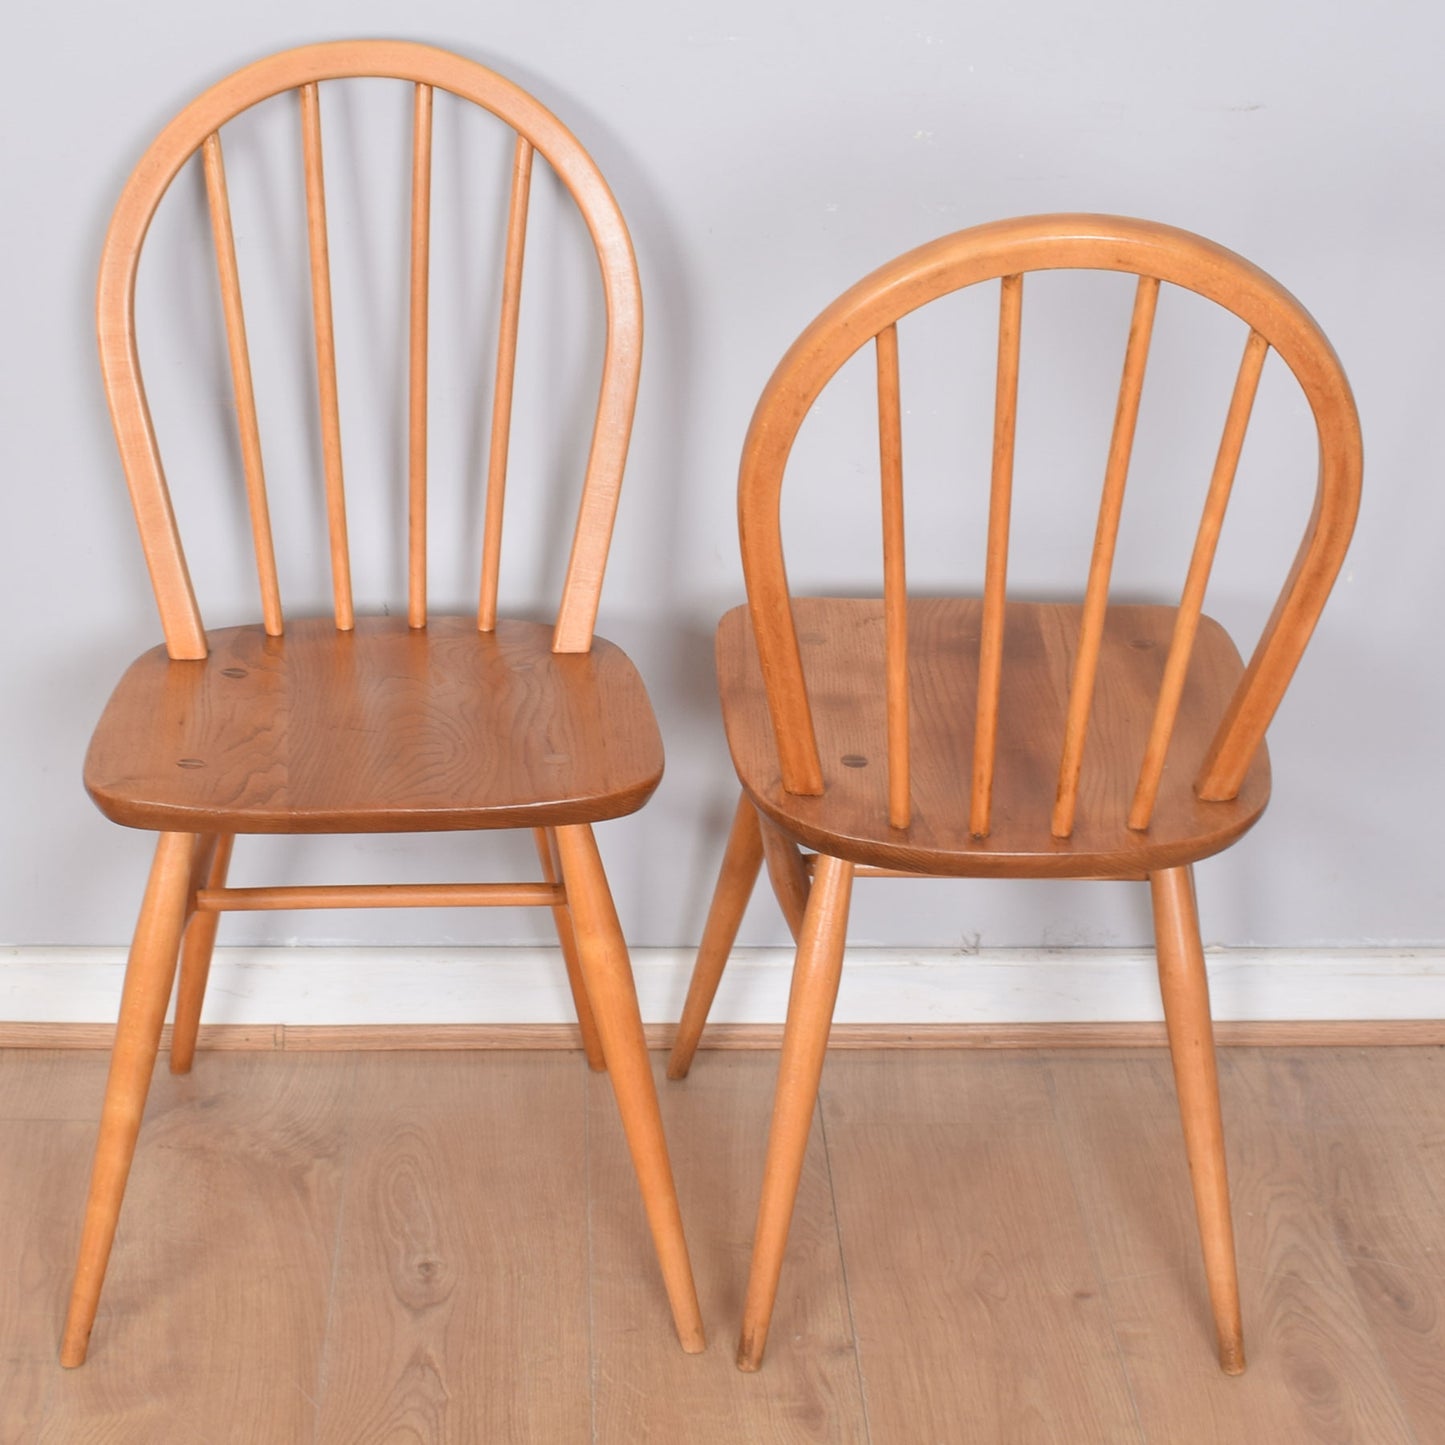 Ercol Dining Table with Four Chairs